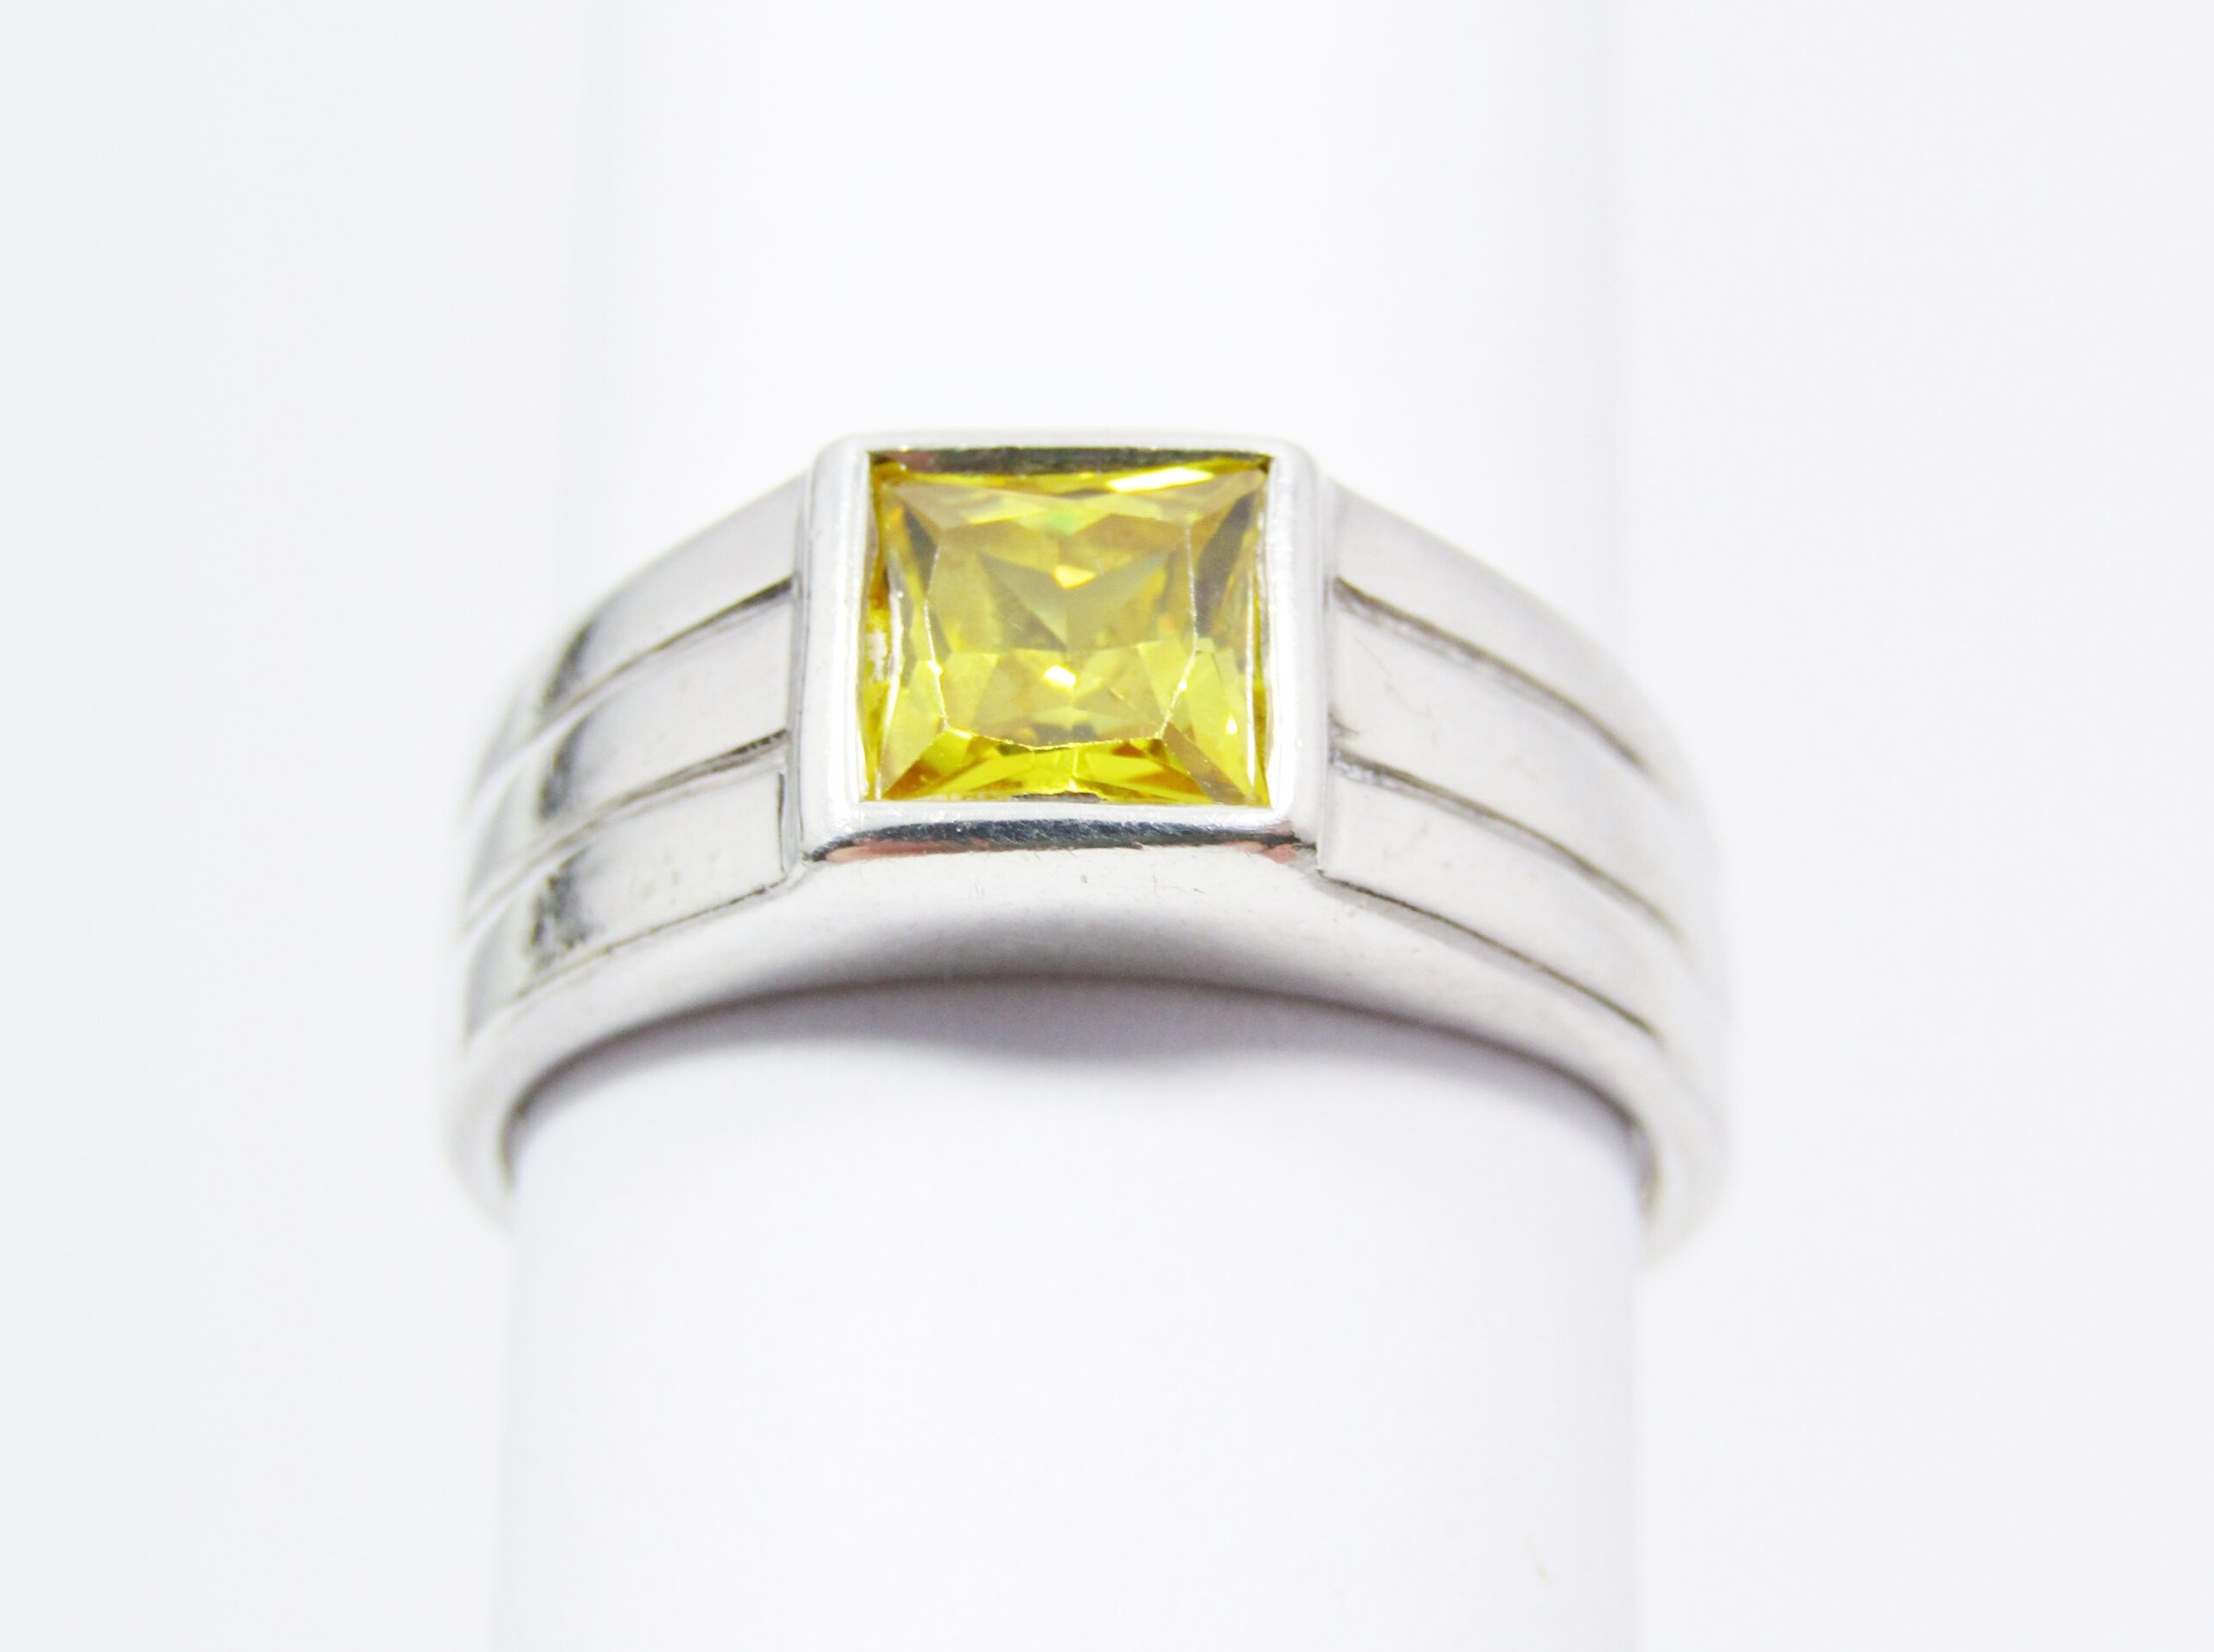 A Lovely Yellow Stone Ring in Sterling Silver.